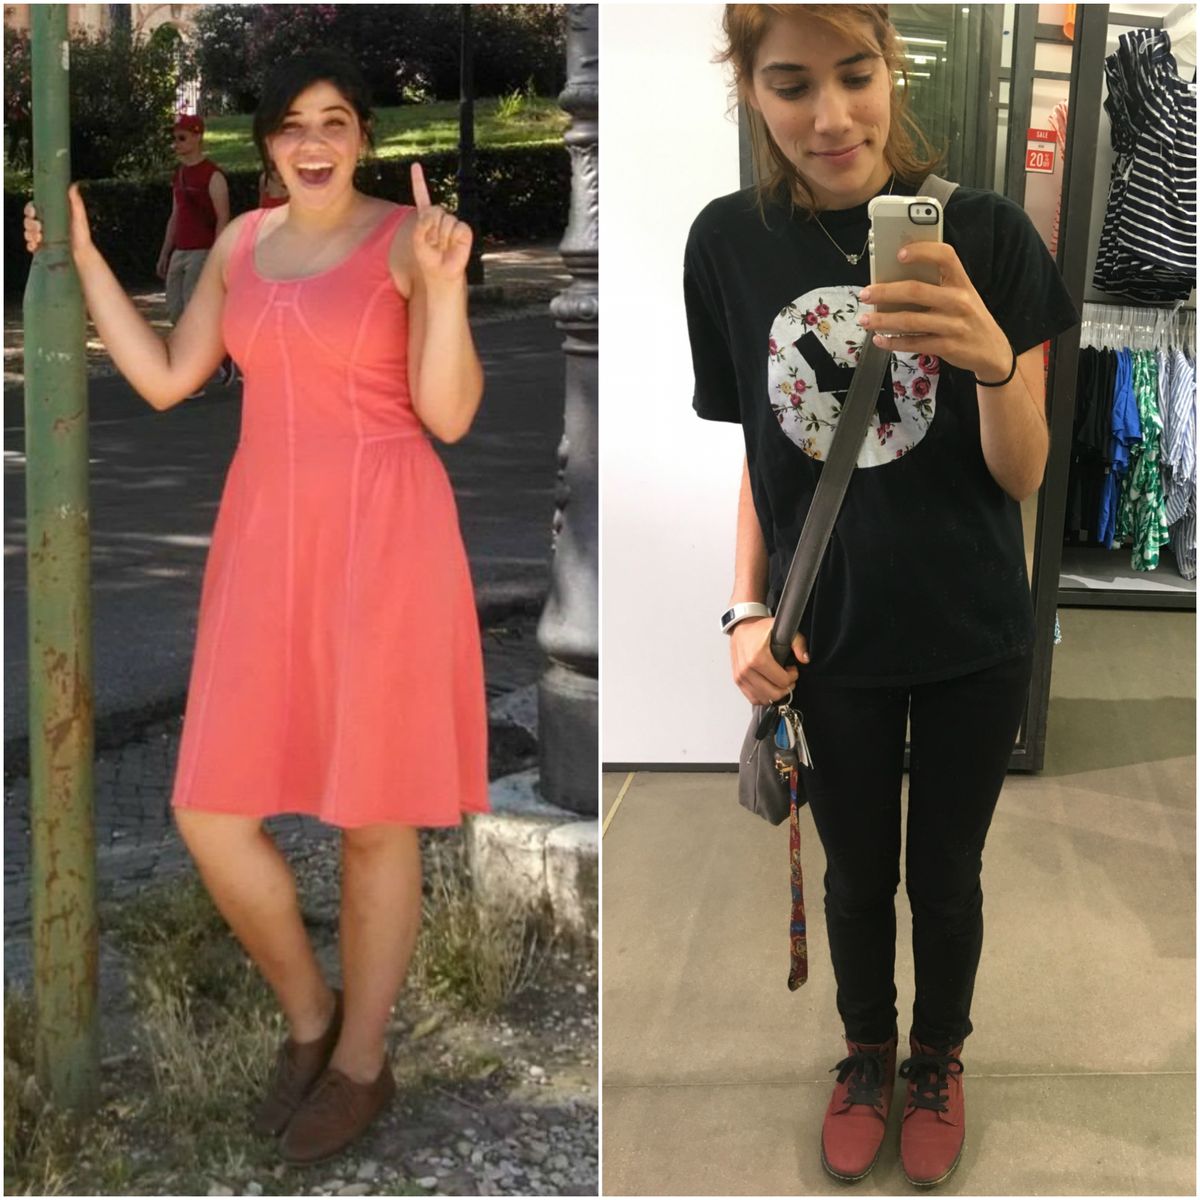 From The Girl Who Lost 30 Pounds